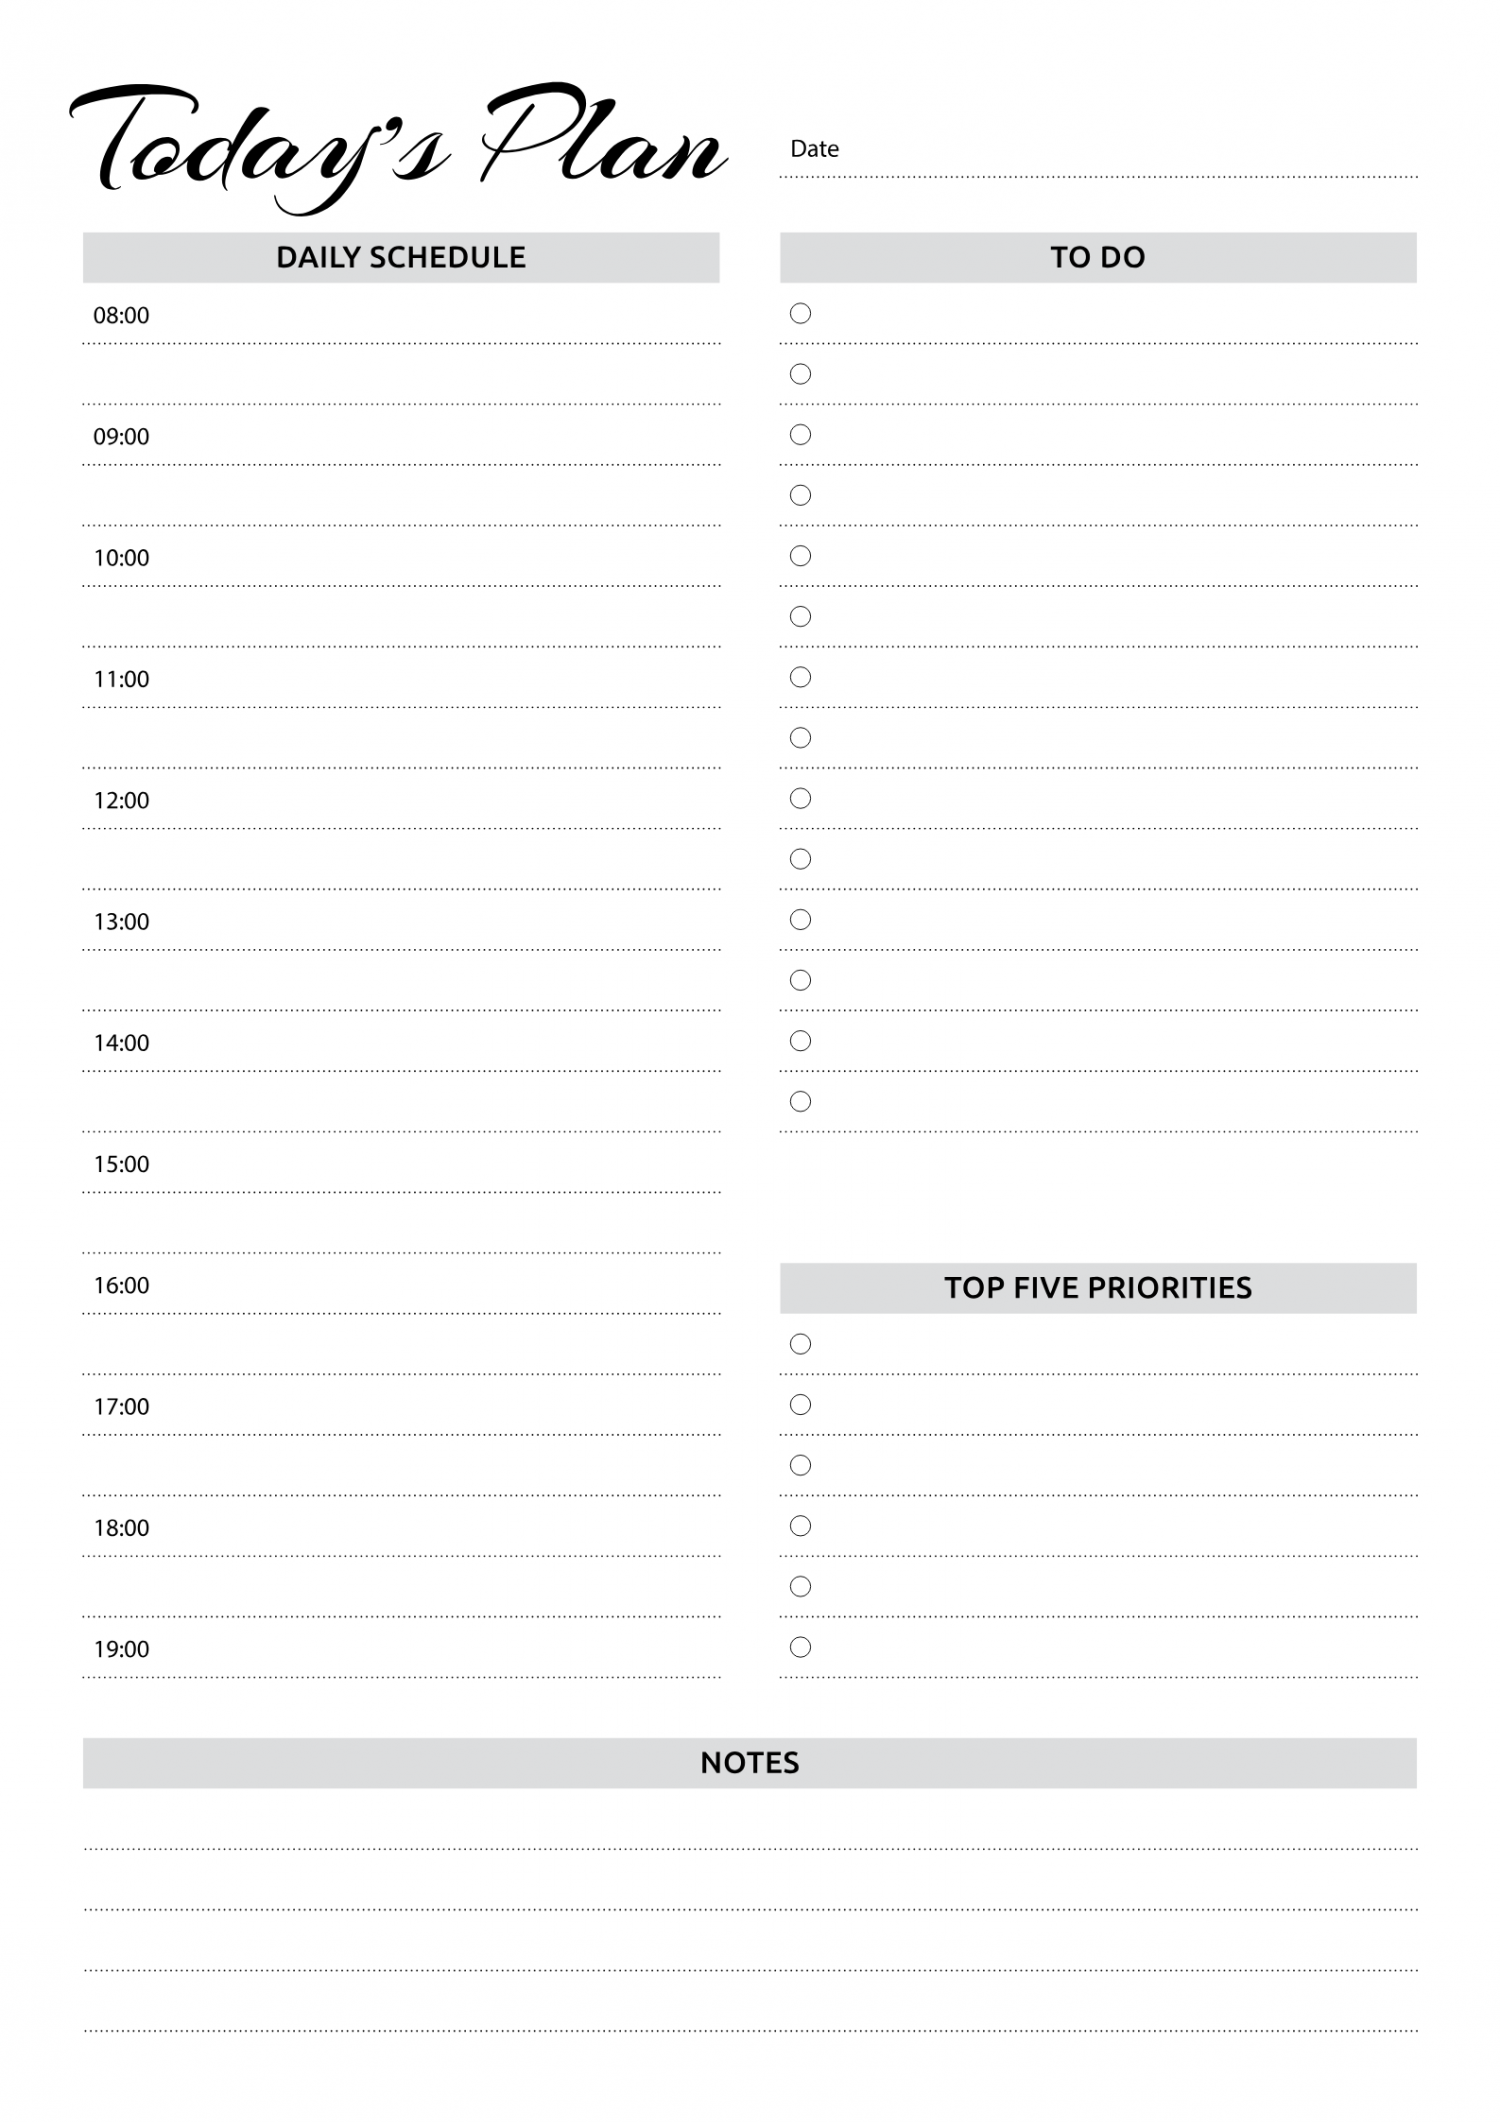 Free Printable Daily planner with hourly schedule & to-do list PDF Download